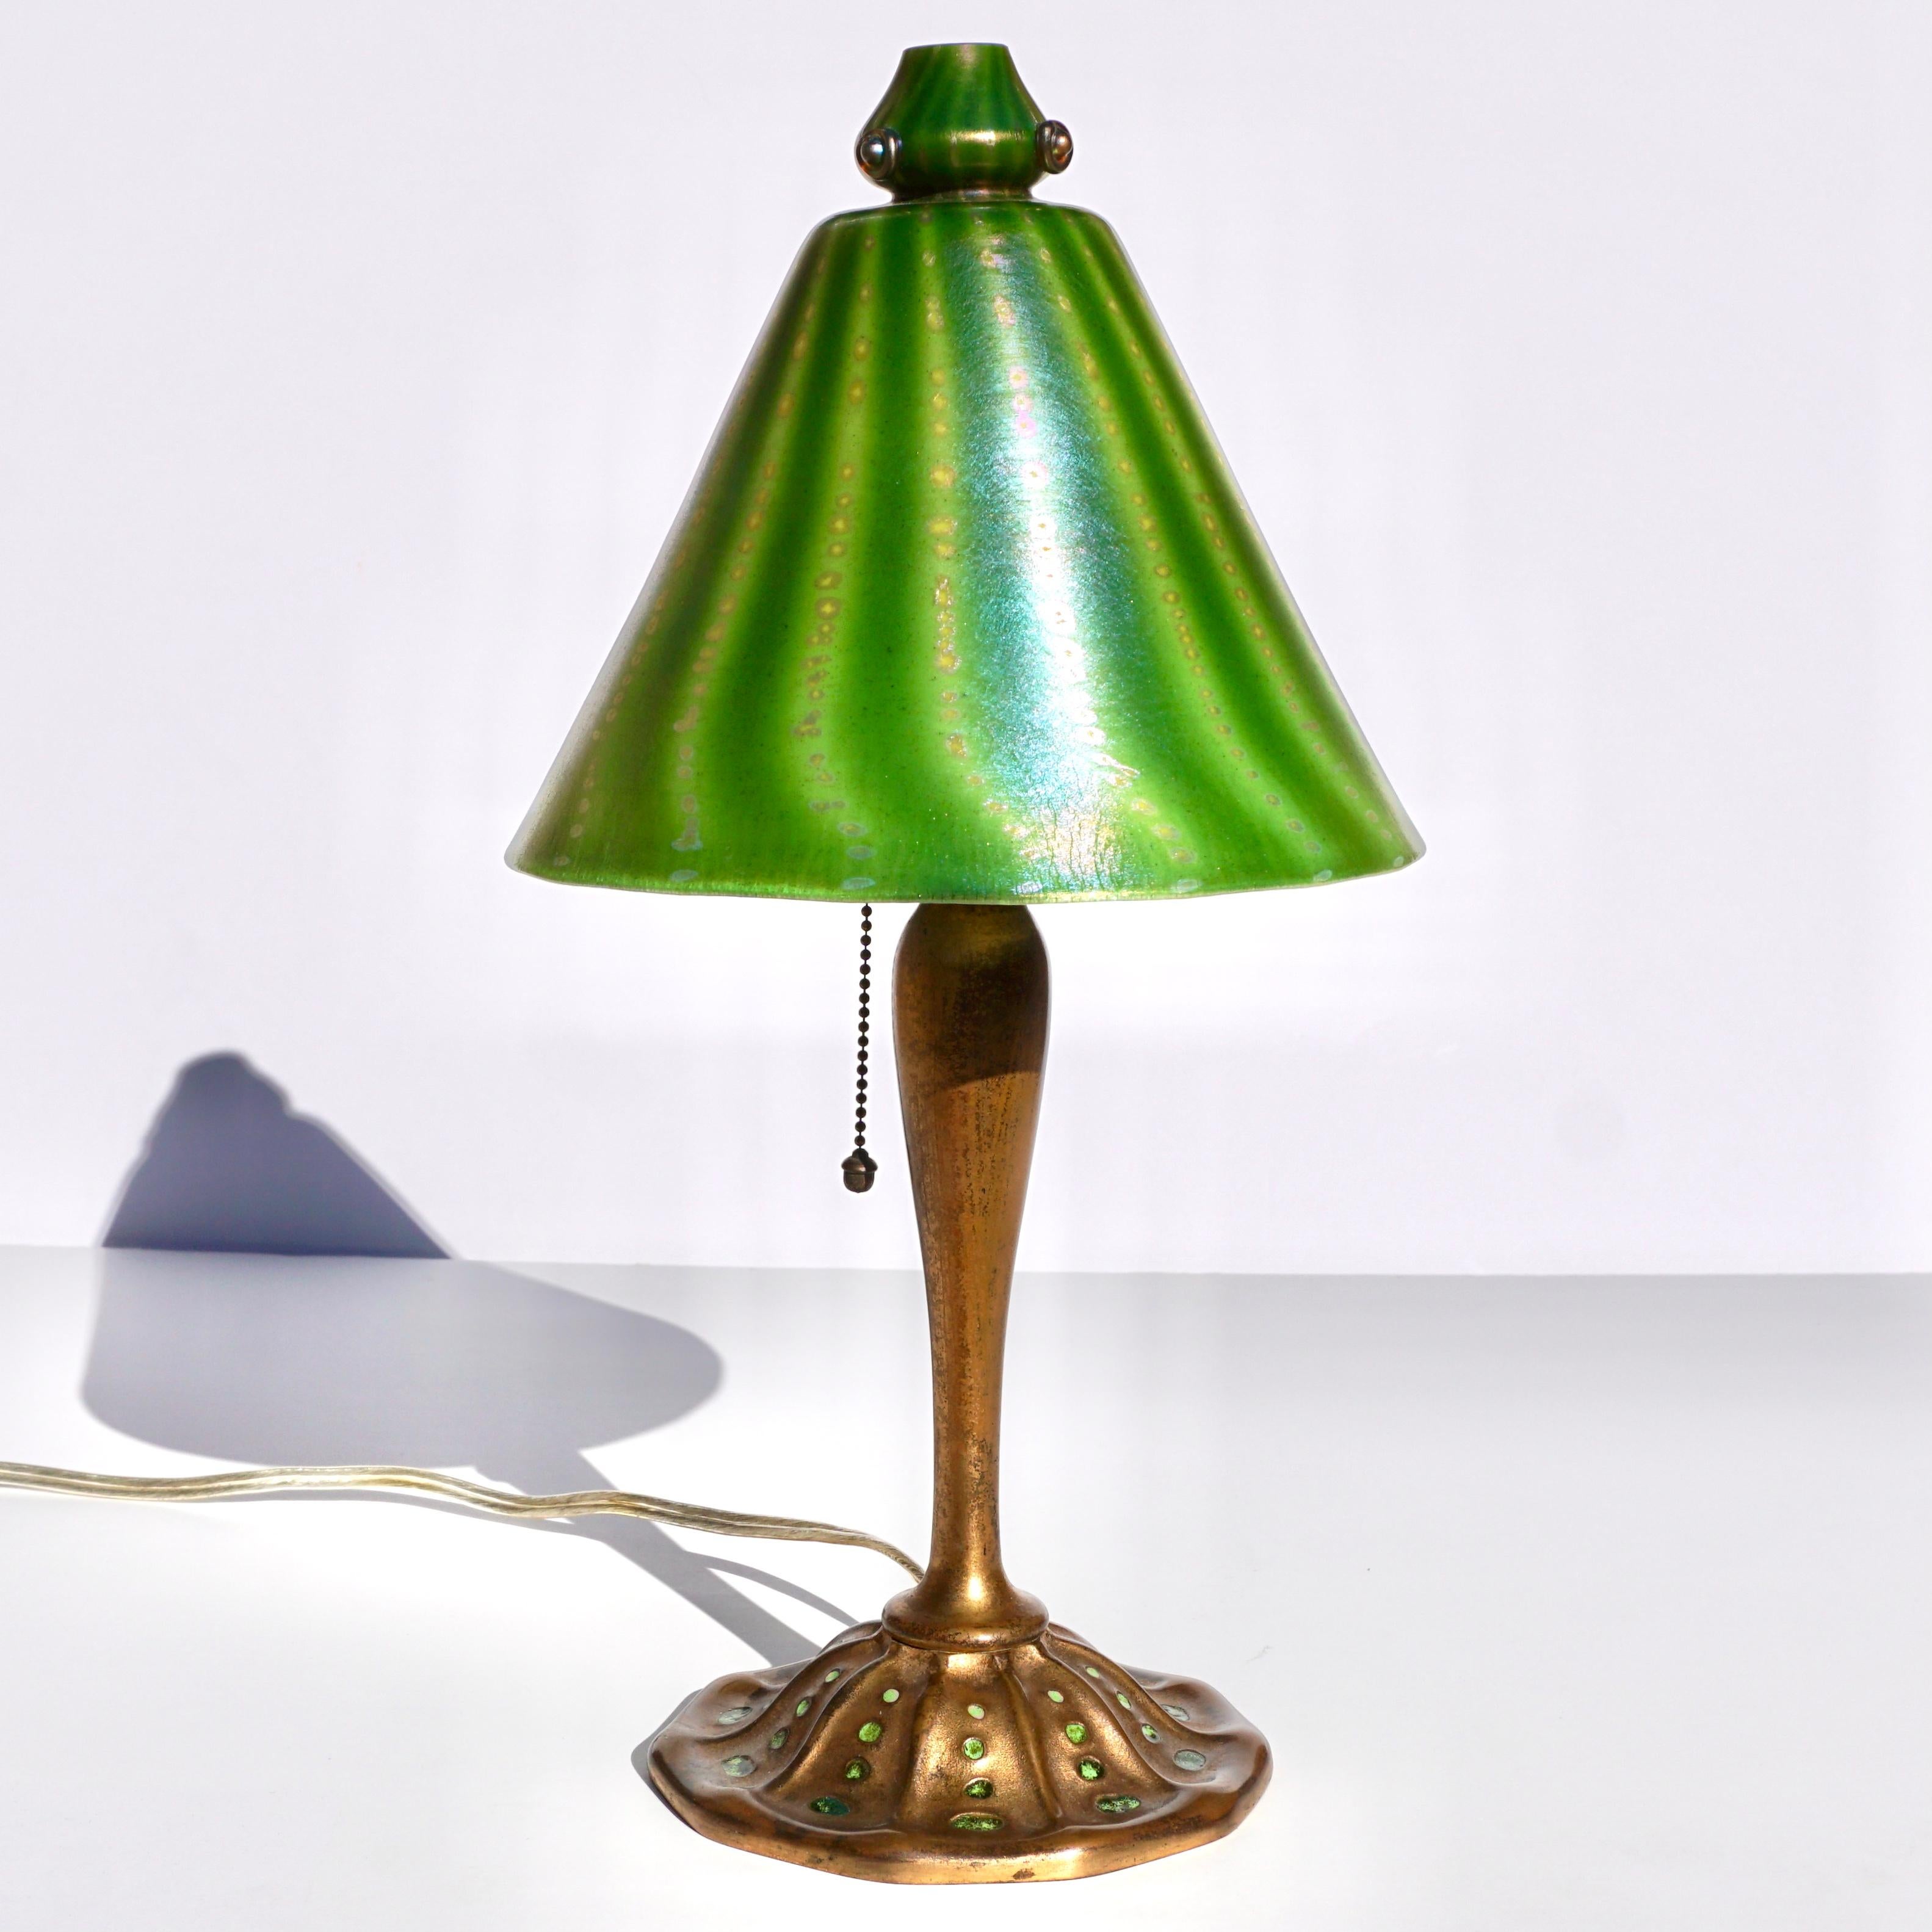 Tiffany Studios Favrile and bronze Aladdin desk lamp.

A beautiful Favrile glass and bronze desk lamp by Tiffany Studios. The conical shade with alternating bands of dark and light green with iridescent accents, with a pattern of gold, iridescent